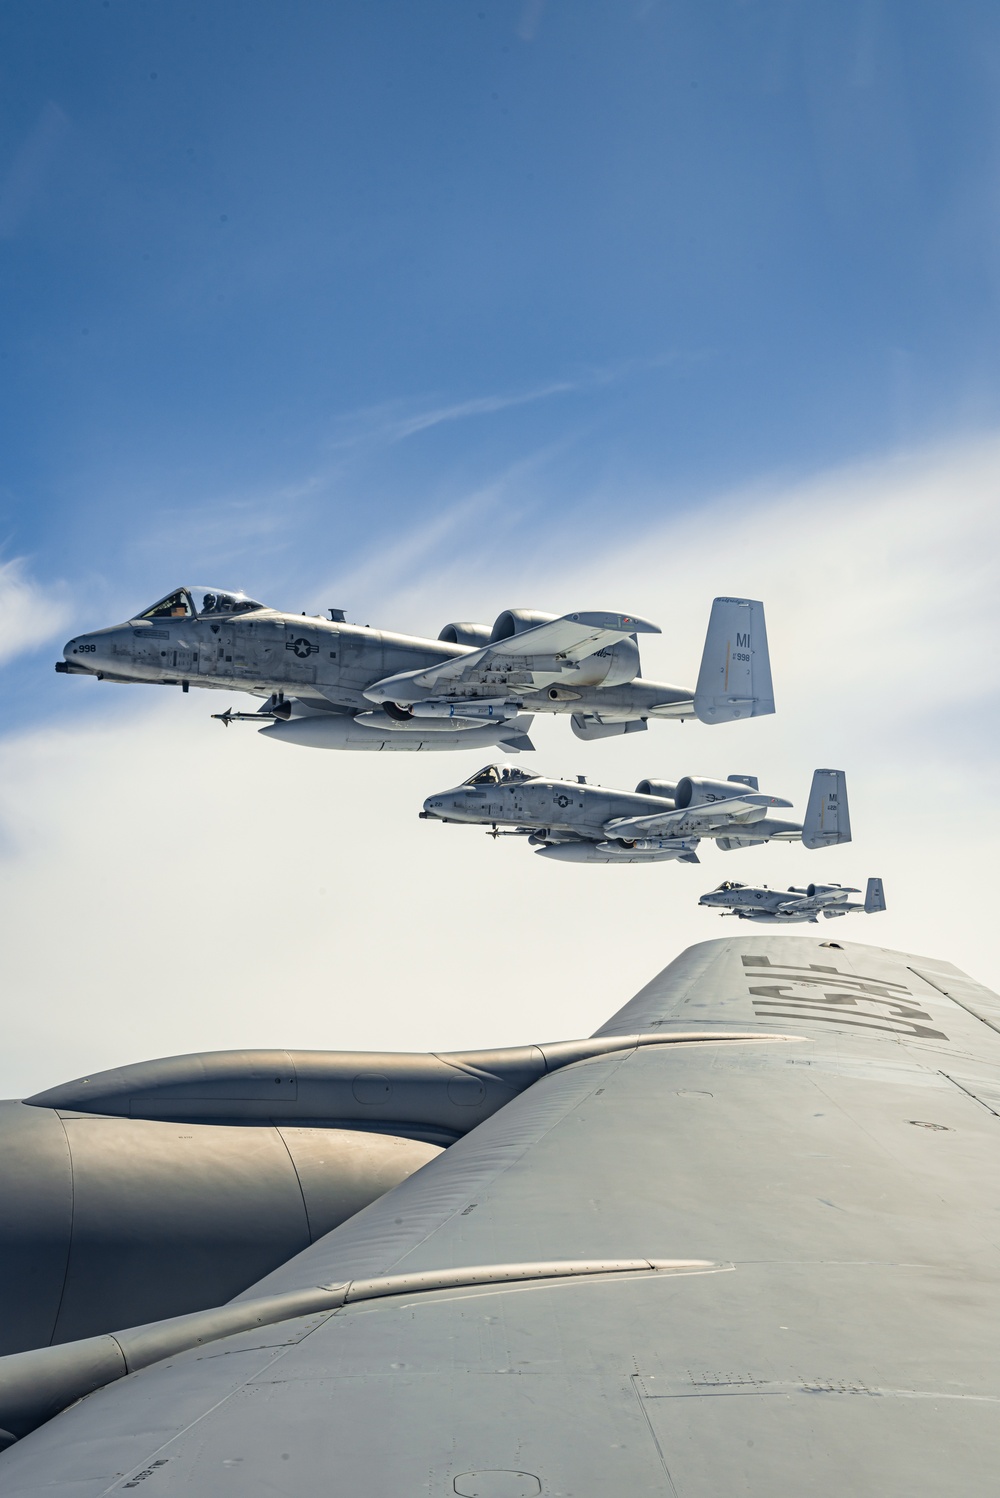 Wallpaper Many A10C Thunderbolt II aircraft runway airport USAF  5120x2880 UHD 5K Picture Image